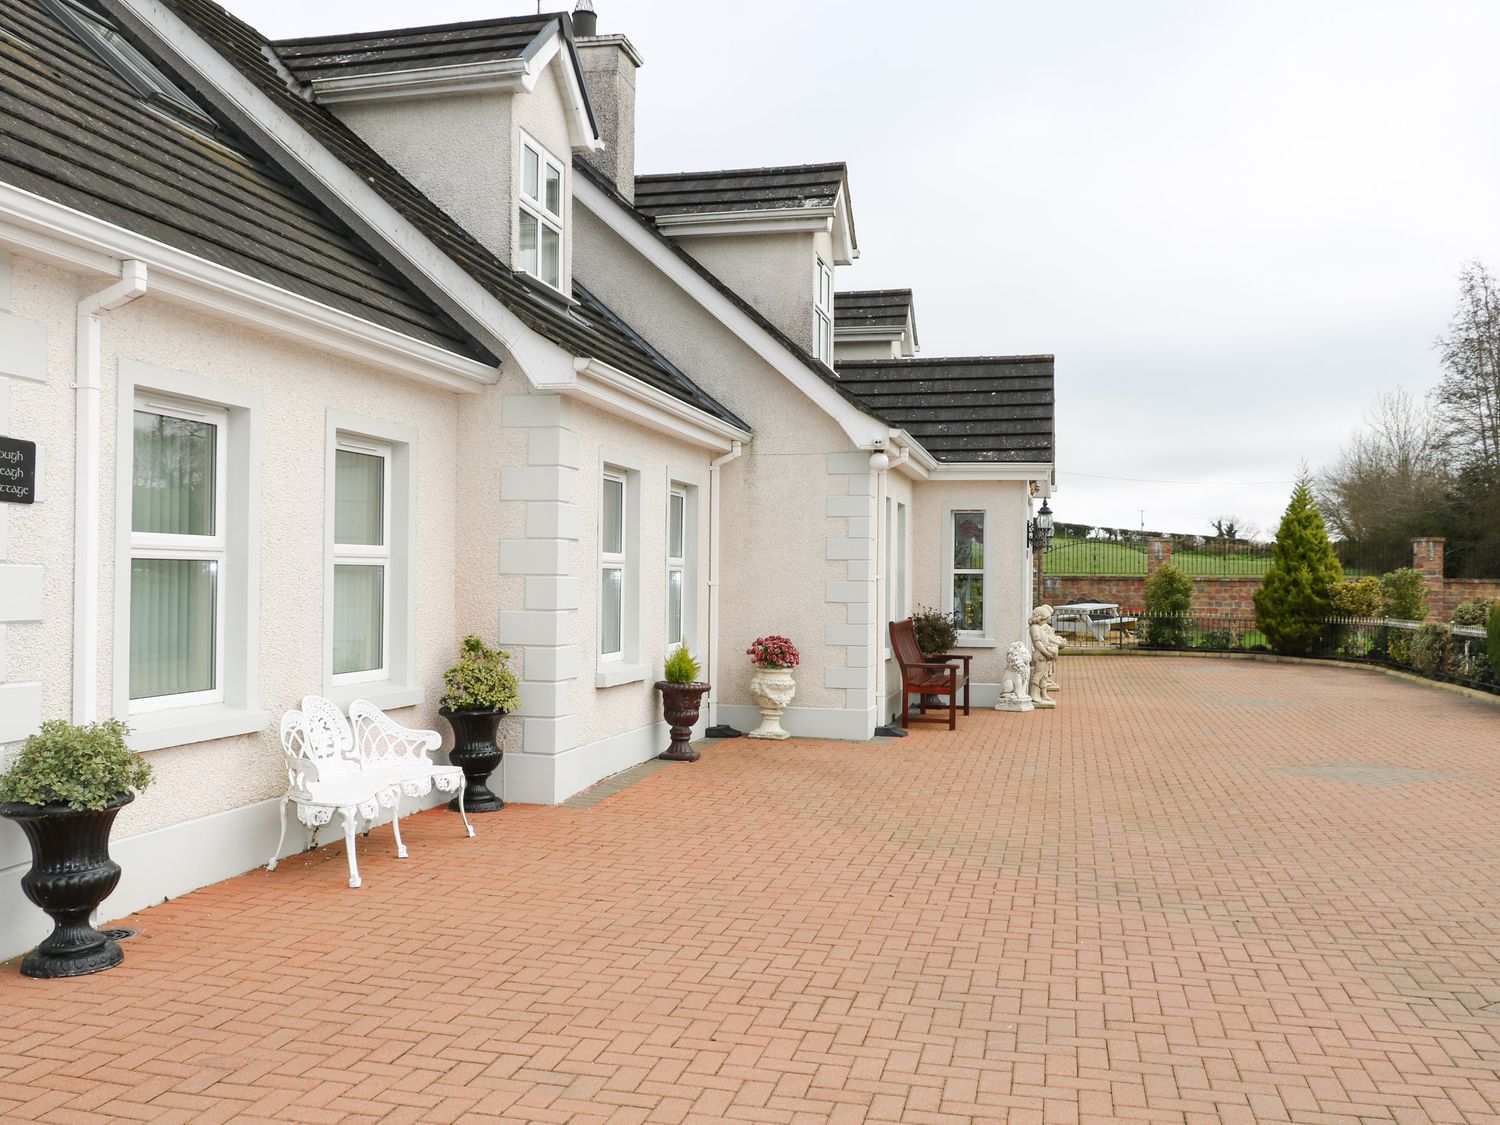 Lough Neagh Cottage, Moneymore